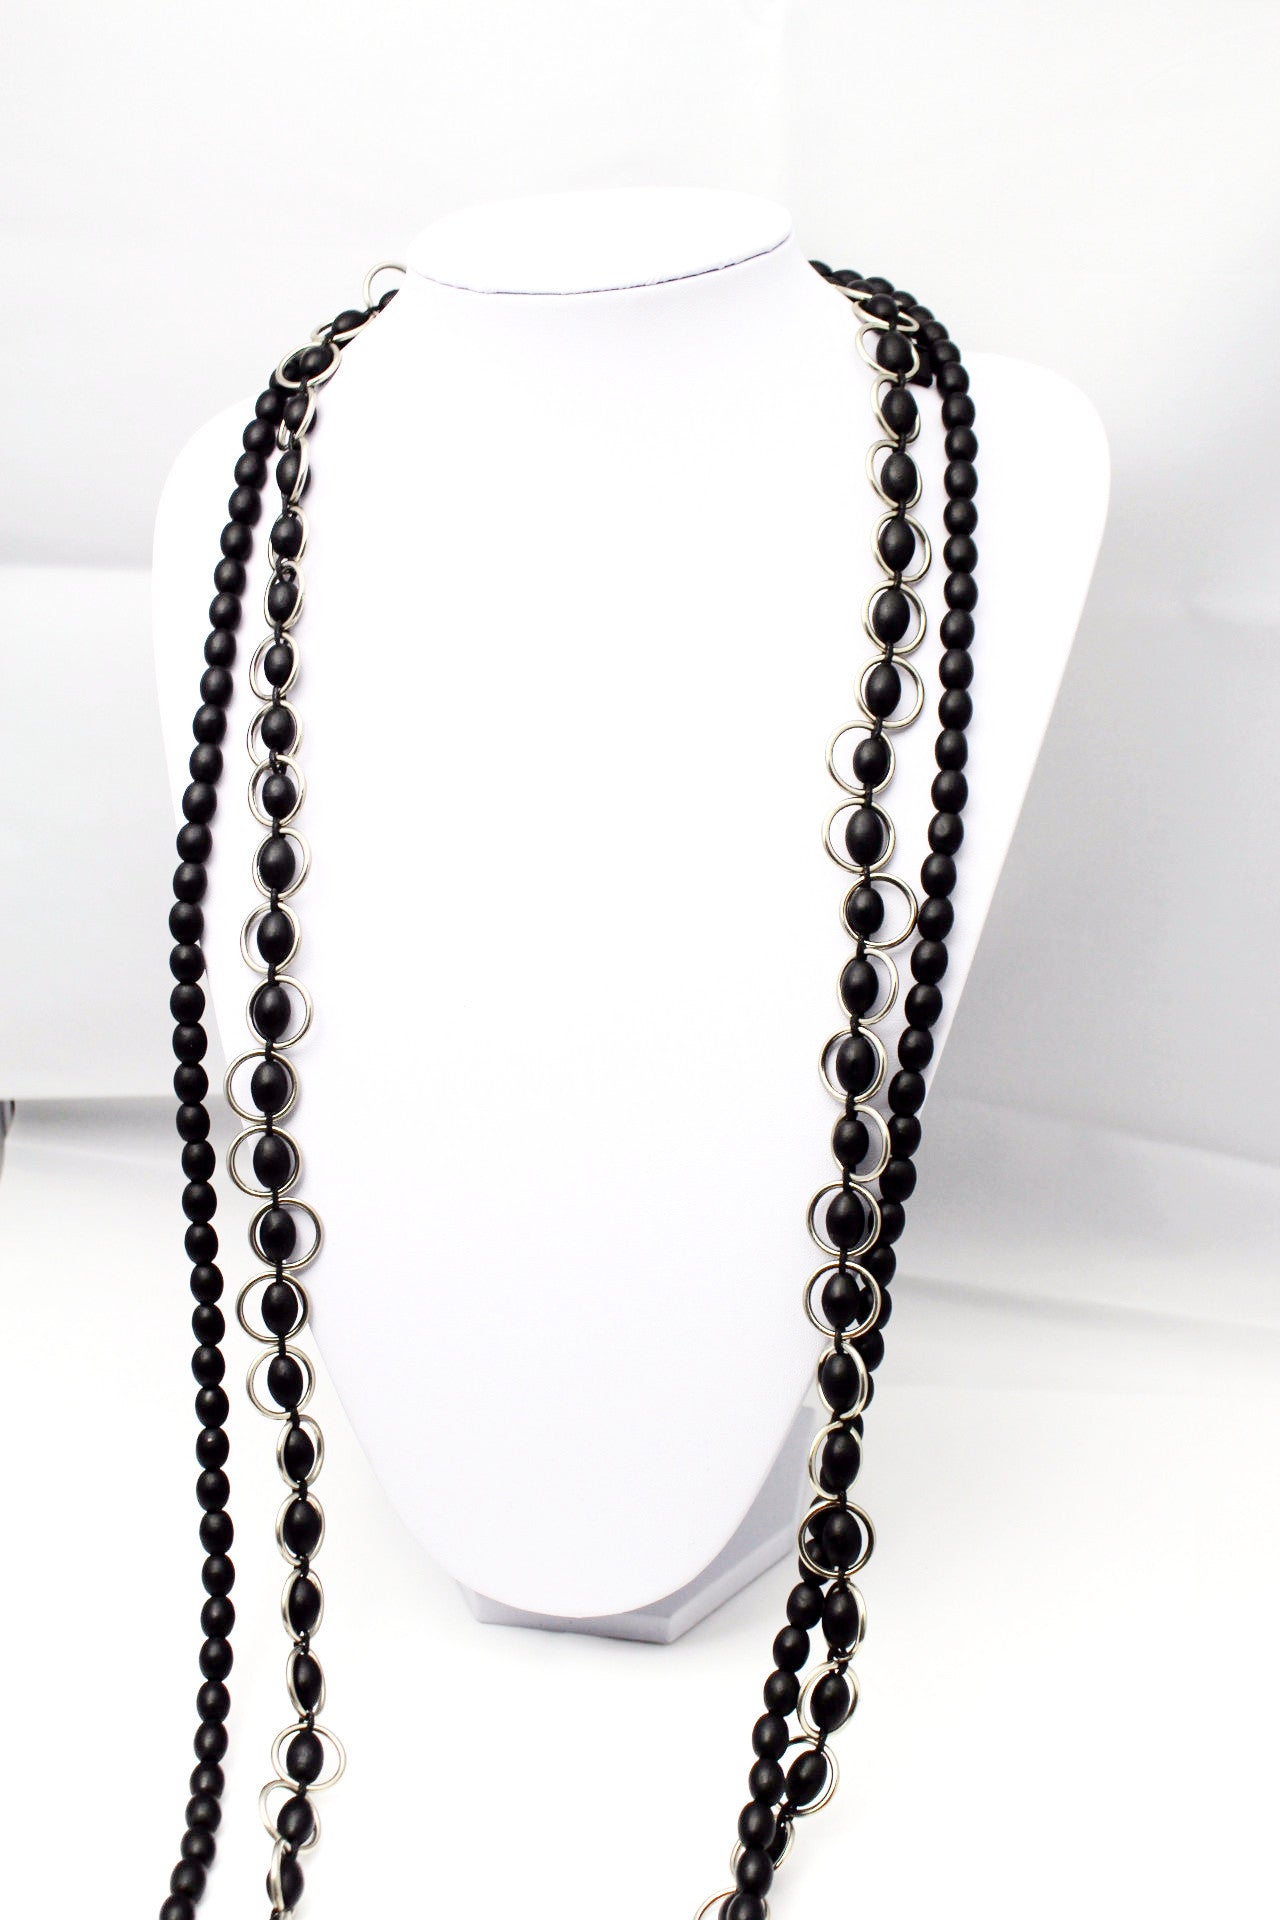 Black and silver bead necklace